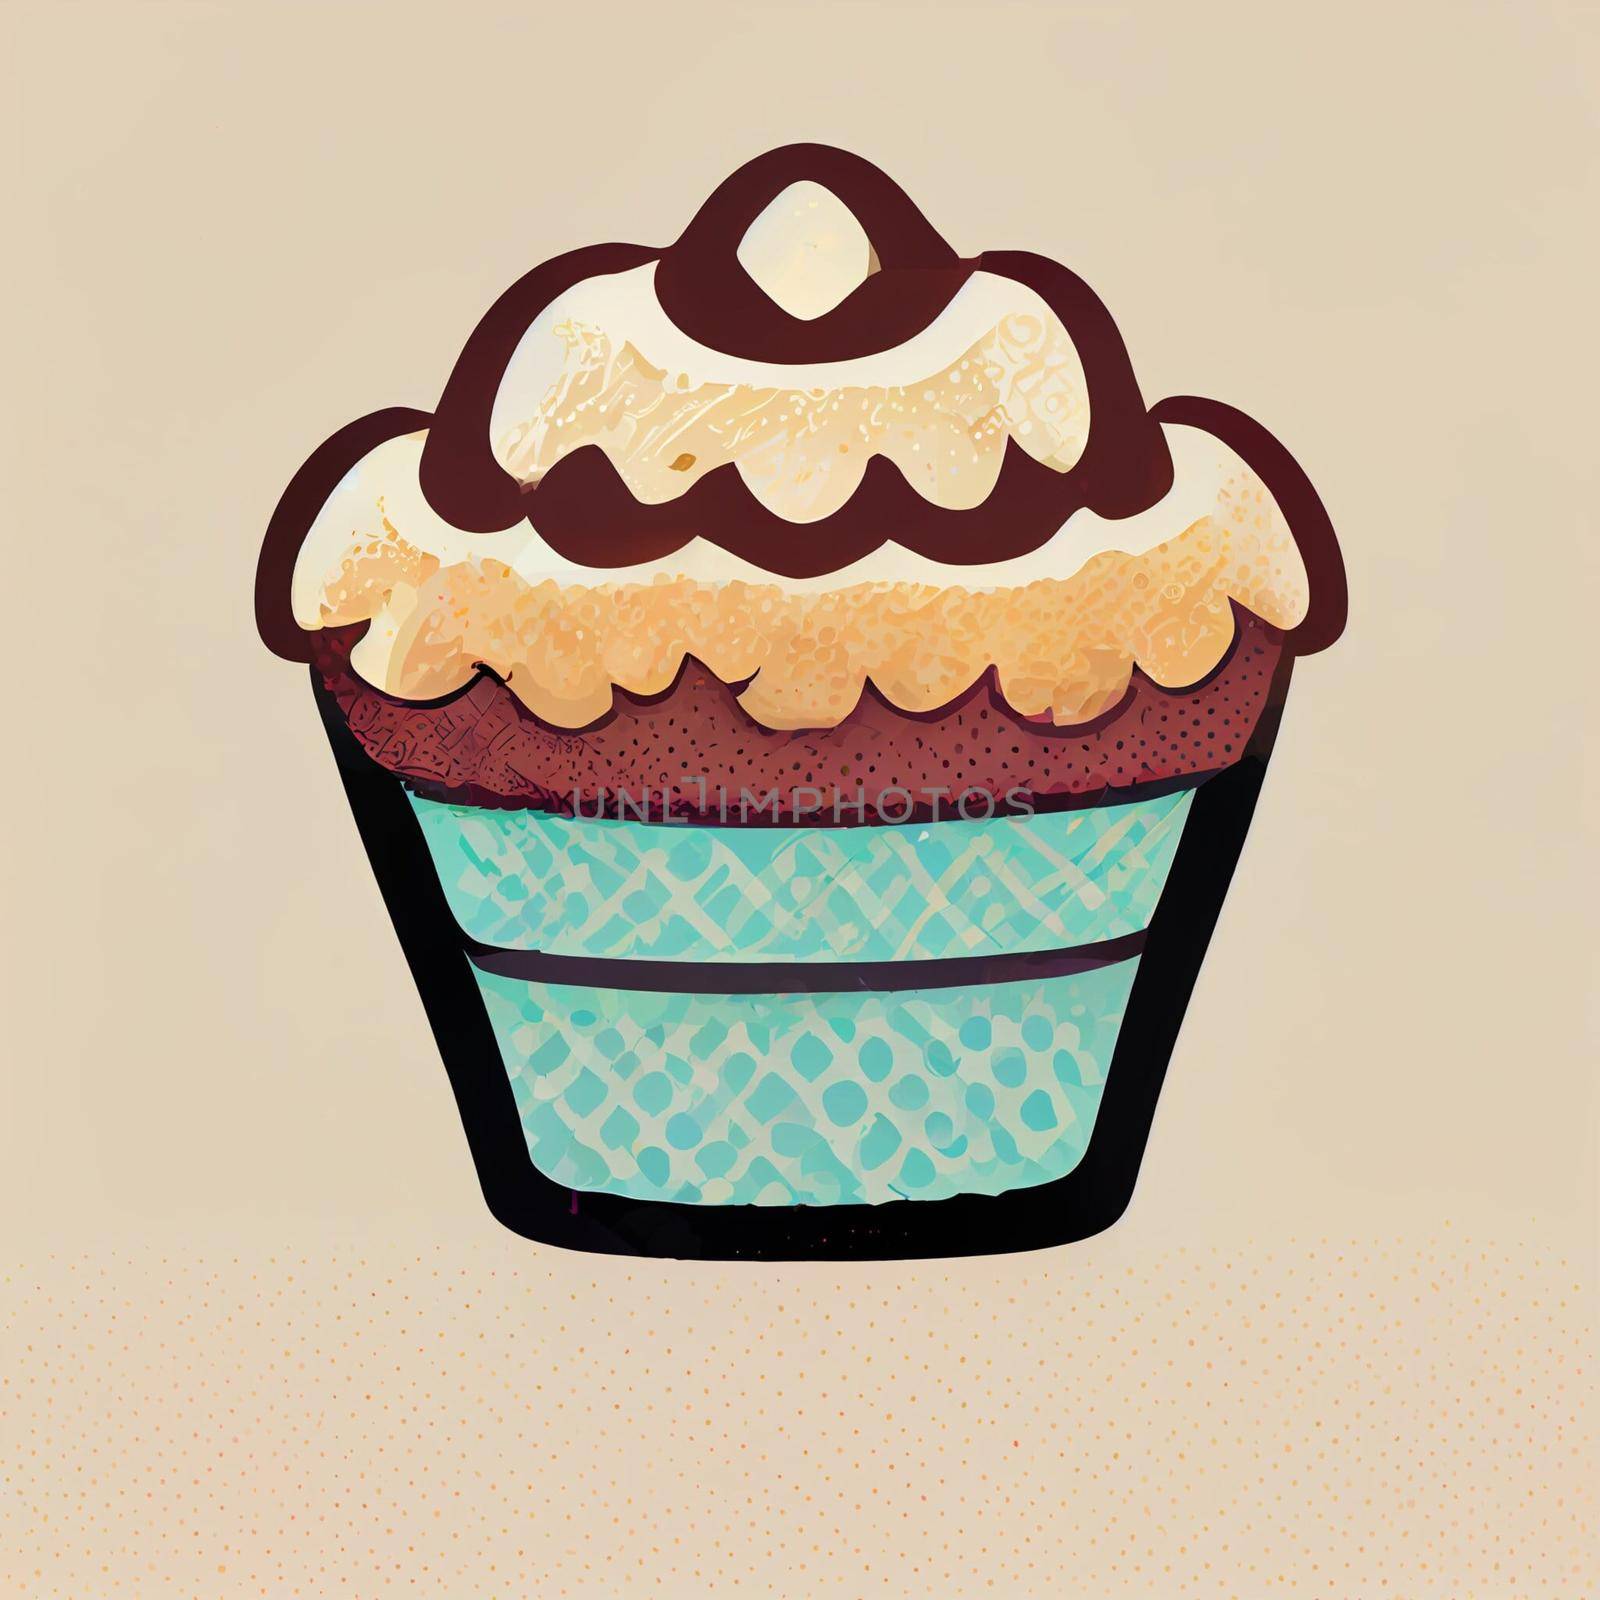 Cupcake set for illustration and drawing material two cupcakes